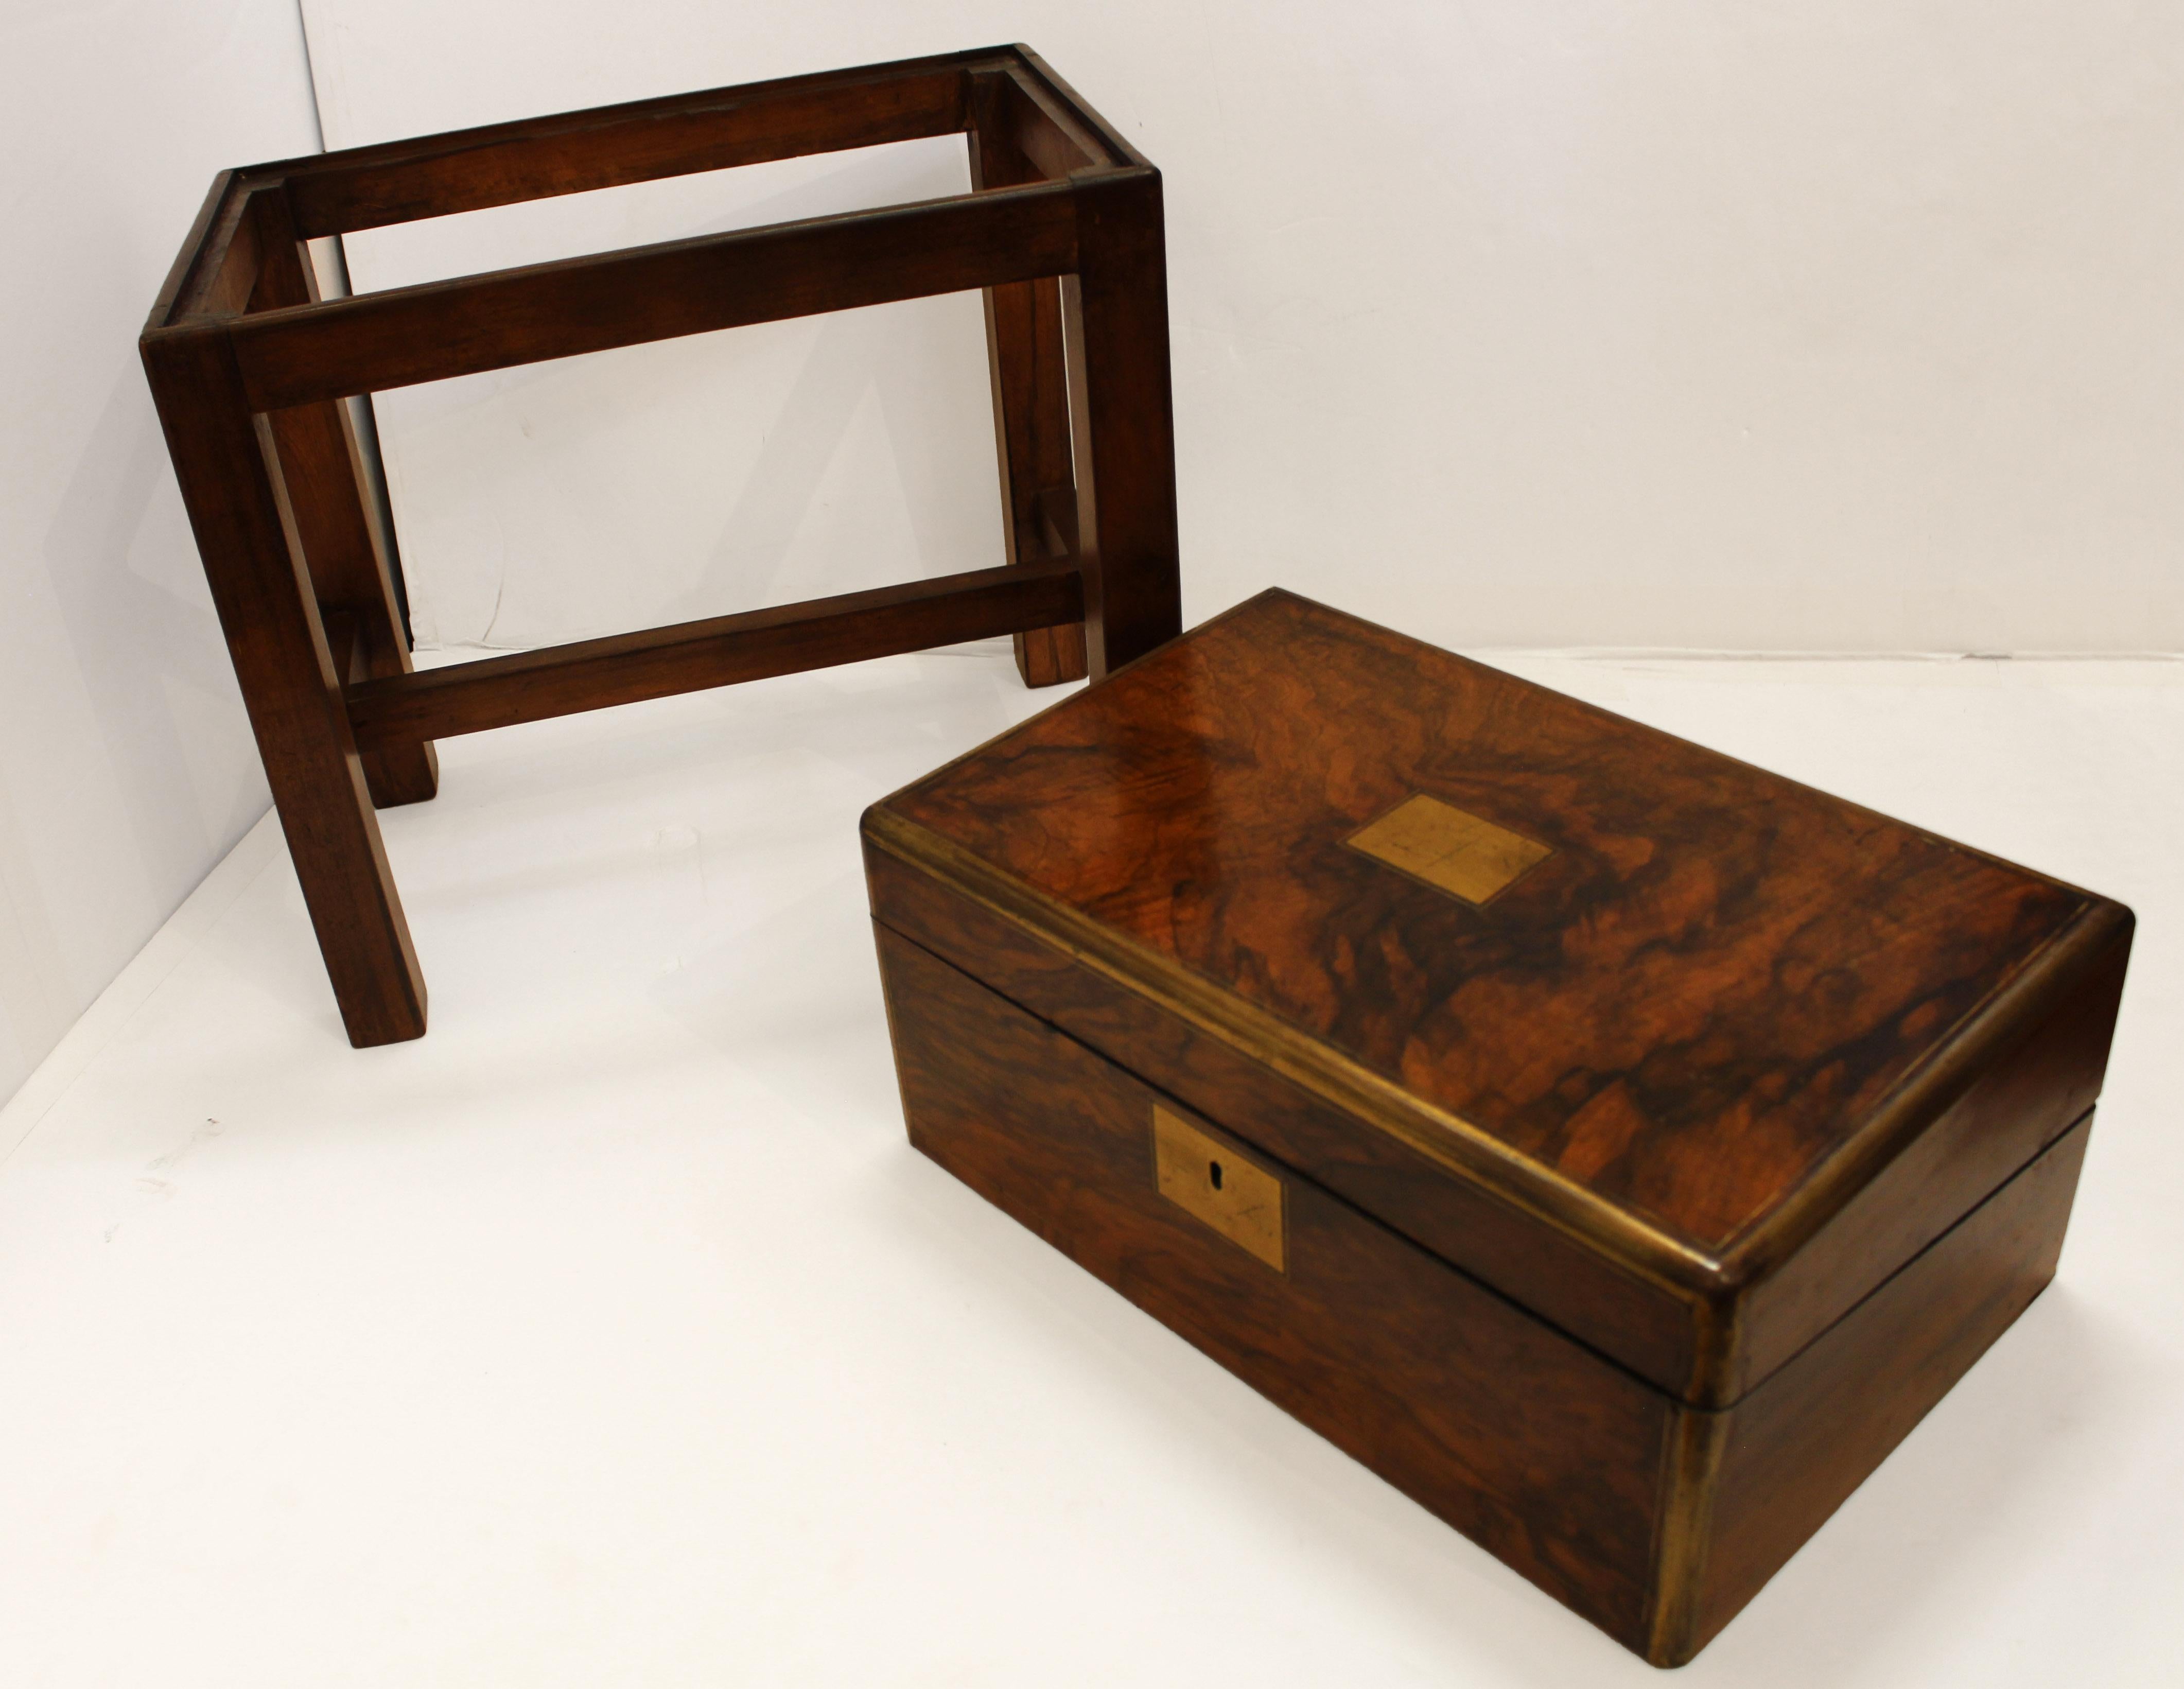 Victorian Circa 1860 English Lap Desk on Custom Side Table Stand